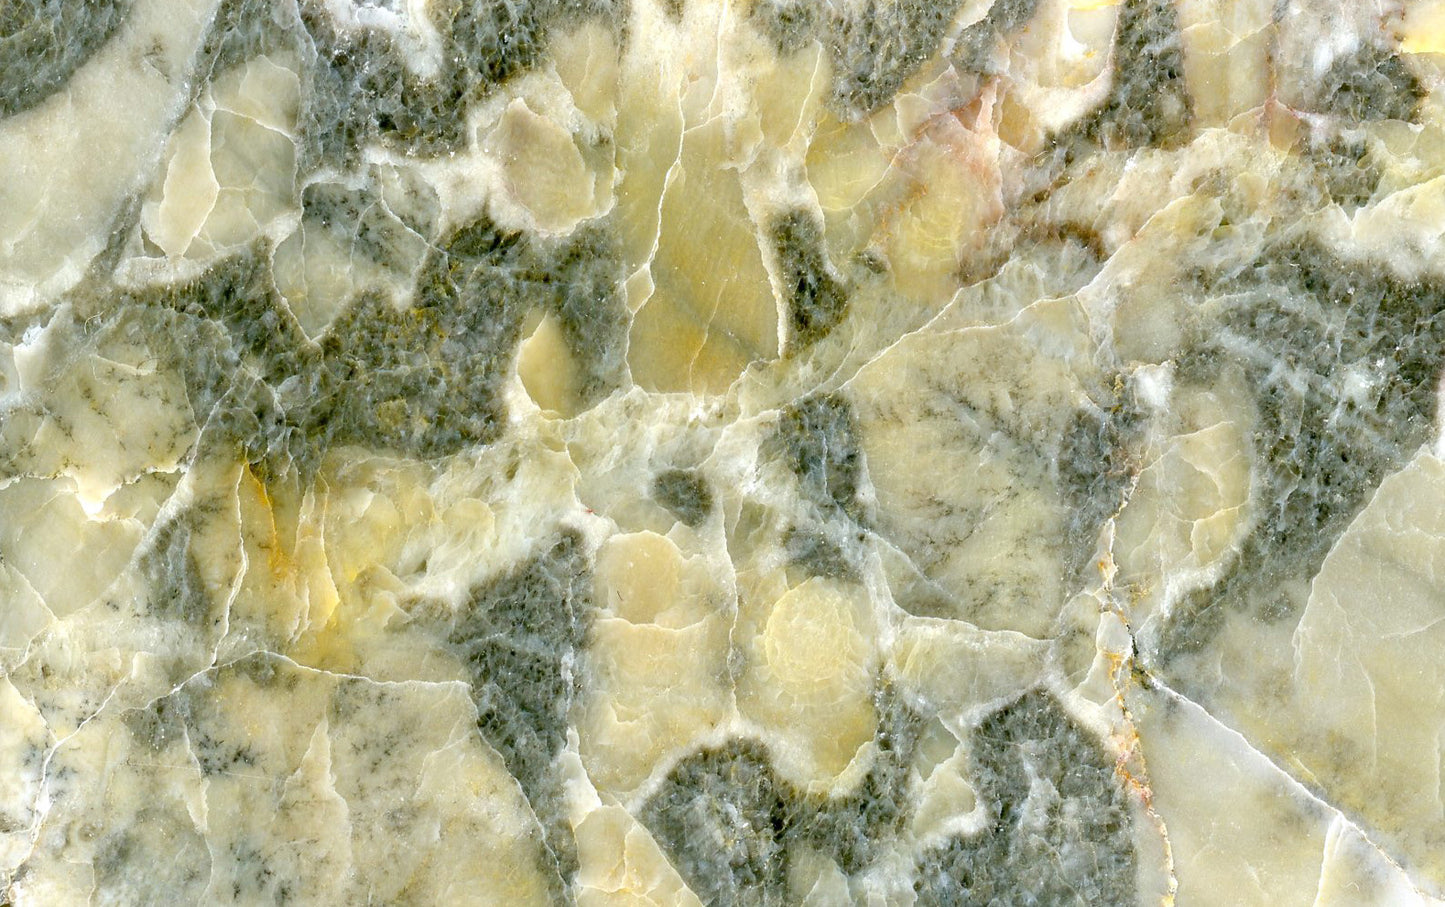 Vilémovice limestone with recrystallized fossils